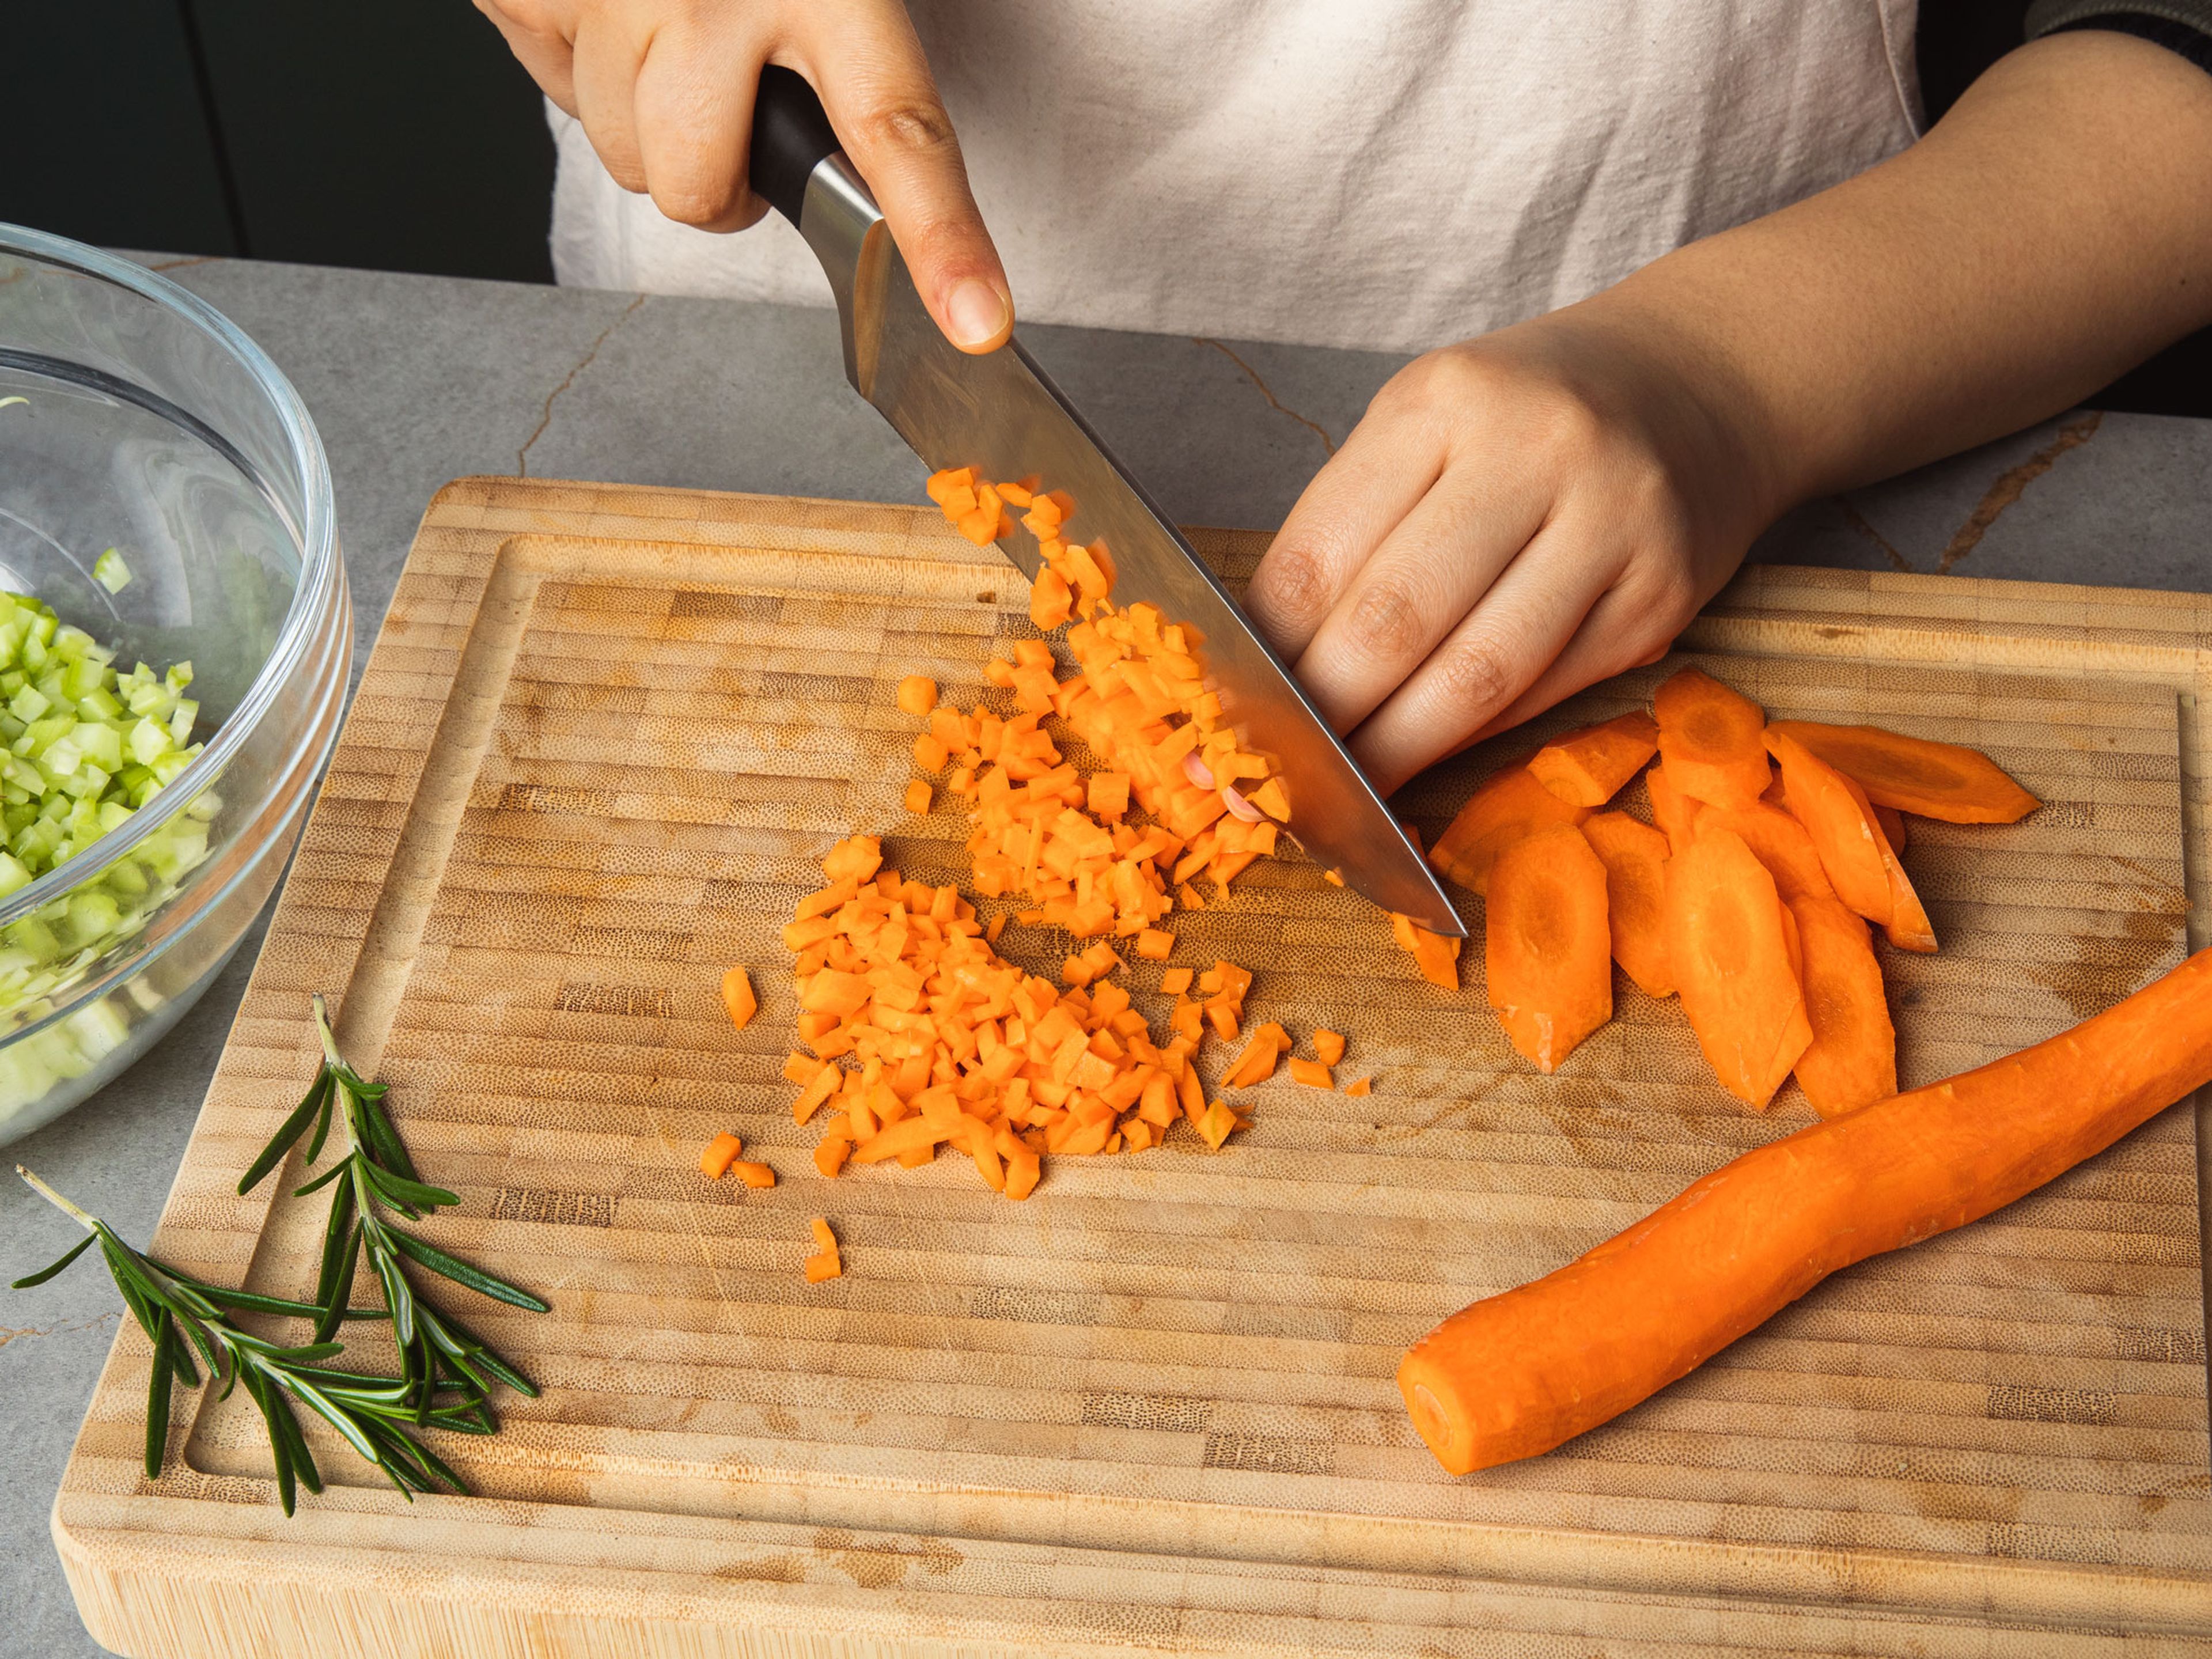 Finely dice garlic, onion, carrot and celery, or use a food processor to chop them into small pieces. Add to a bowl. Drain canned white beans in a sieve.